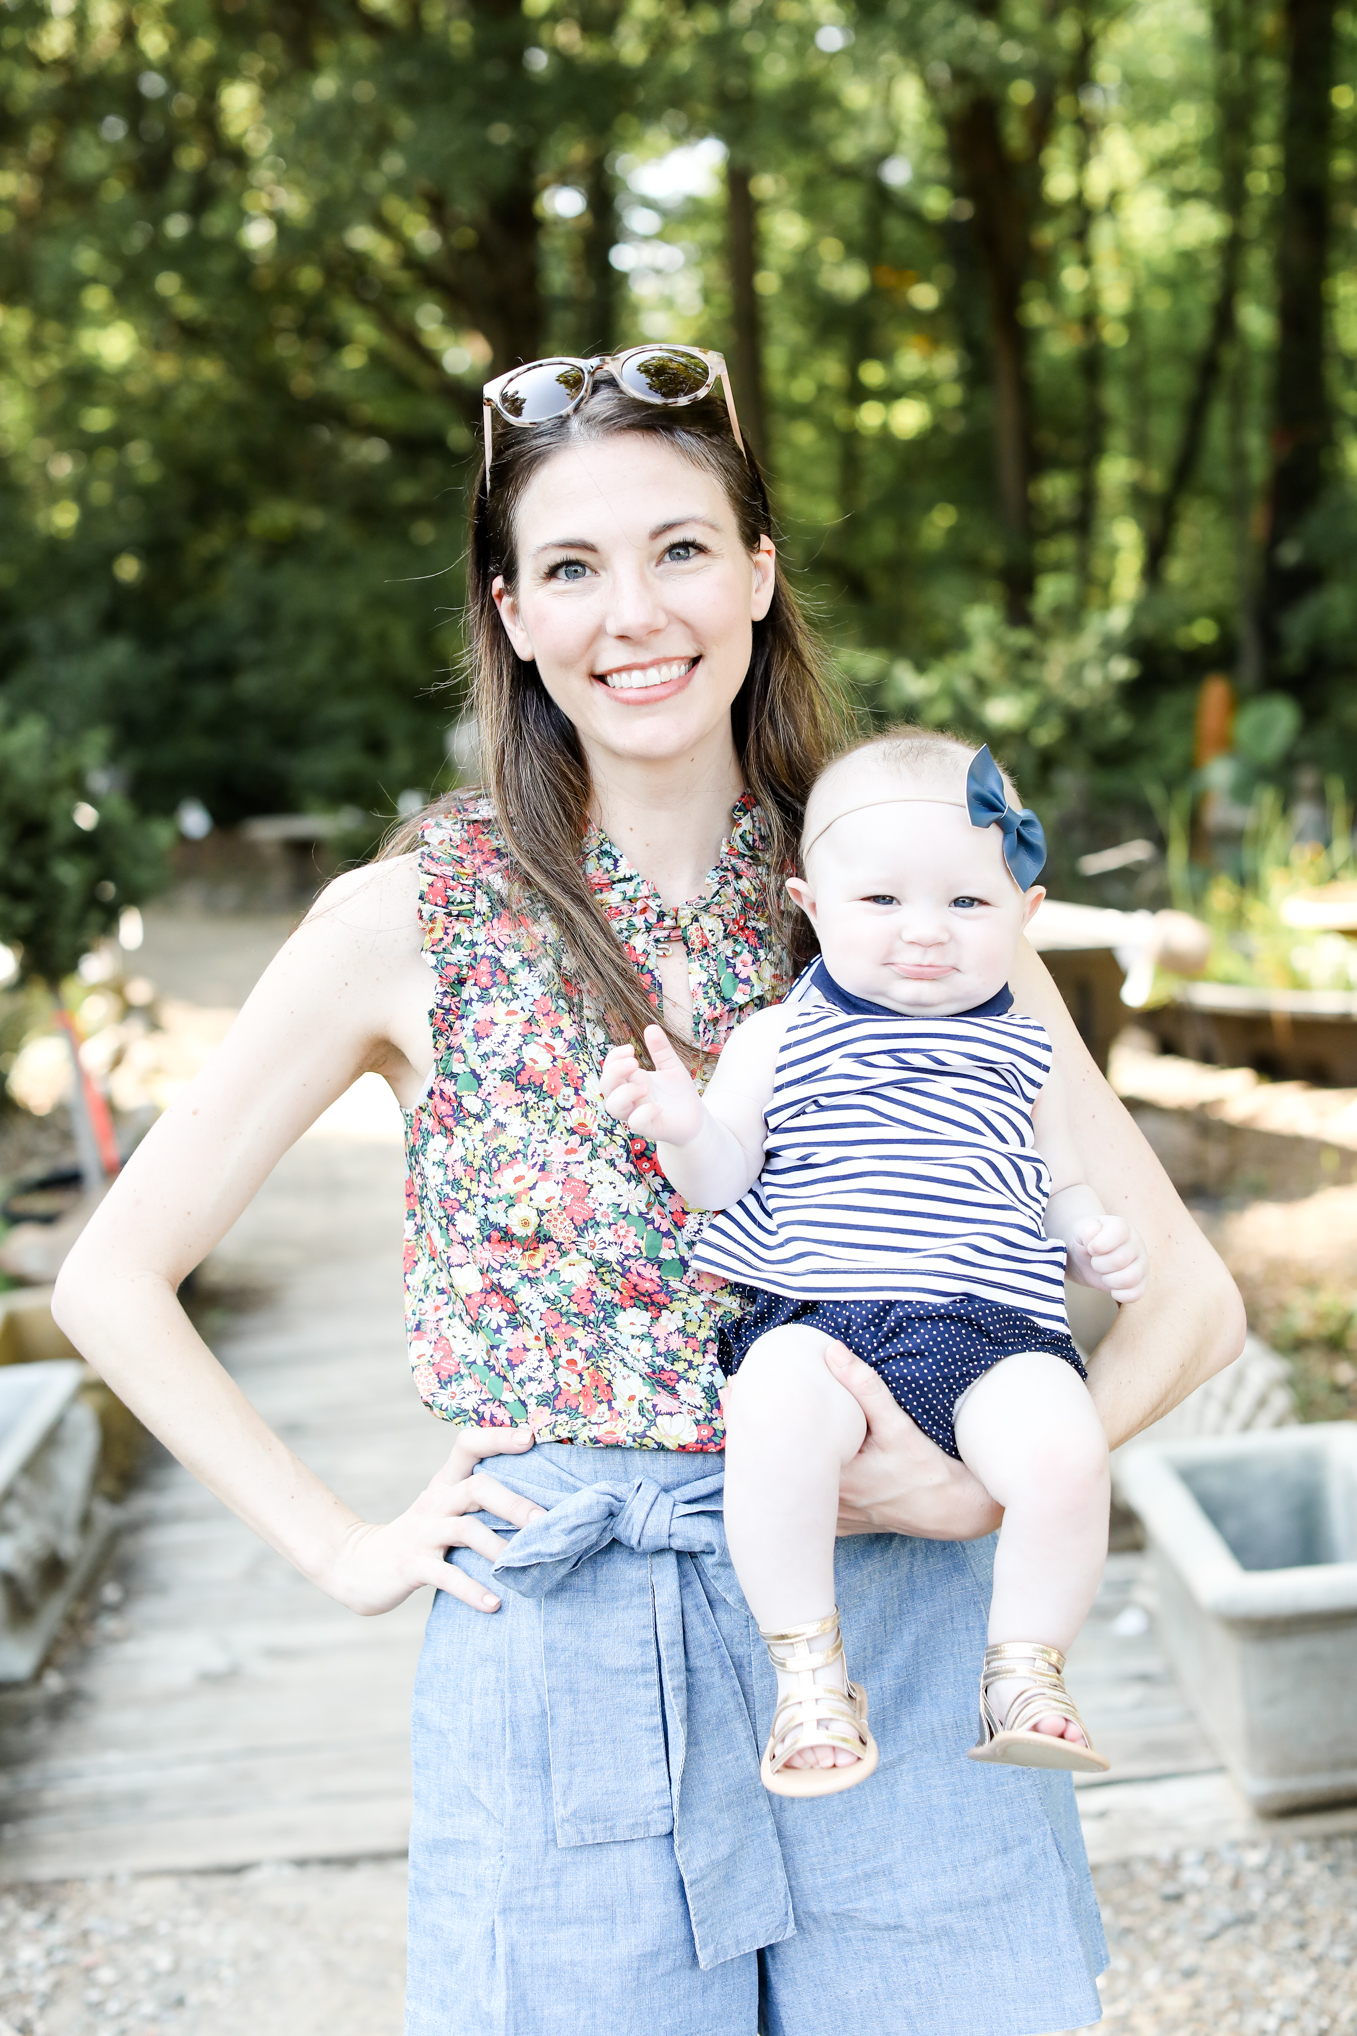 navy with floral print | Lifestyle blogger Elle Bowes shares her favorite jcrew new arrivals